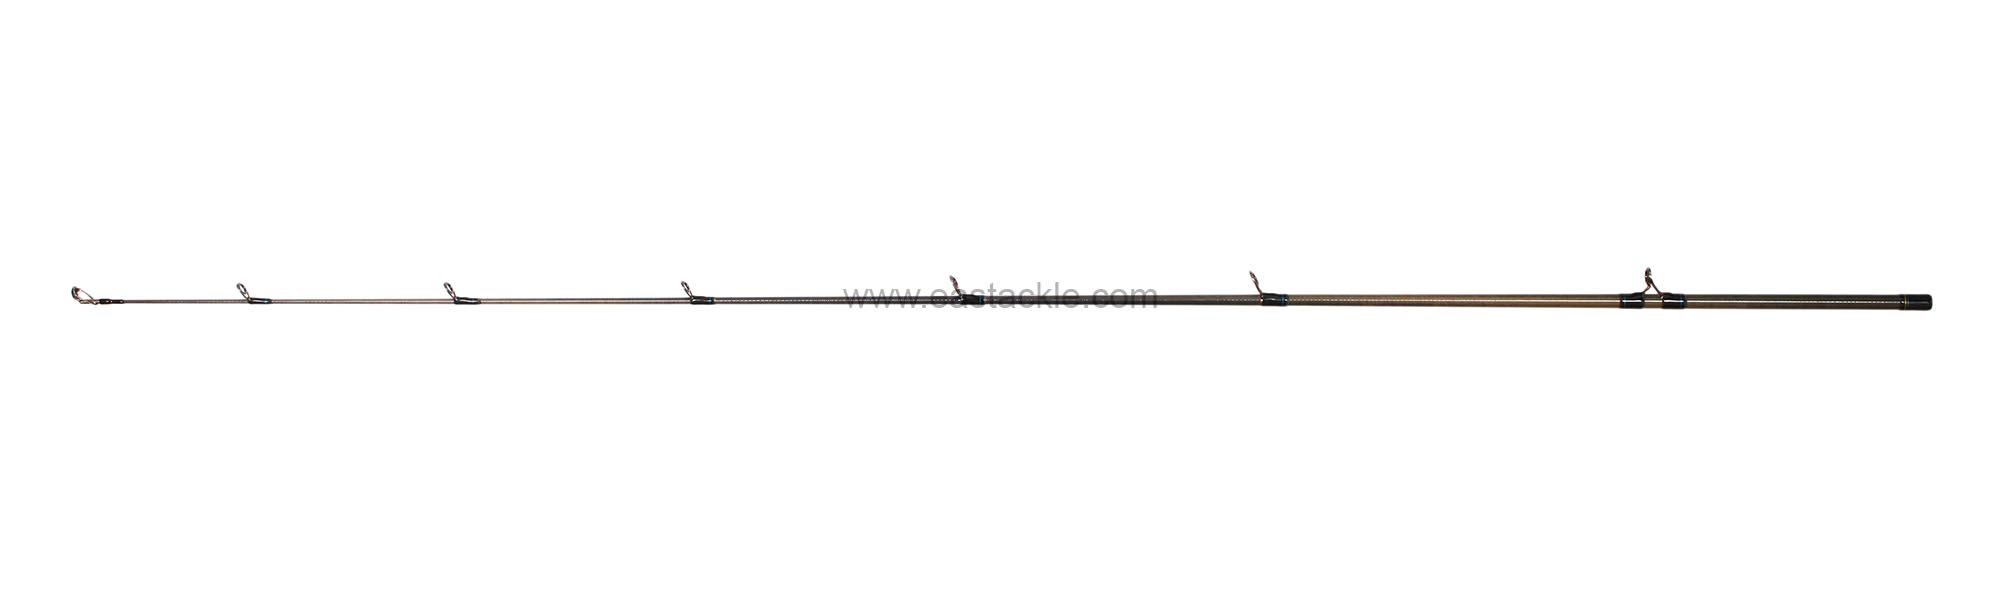 Daiwa - Harrier  - 602MHB-SD - Bait Casting Rod - Tip Section (Side View) | Eastackle